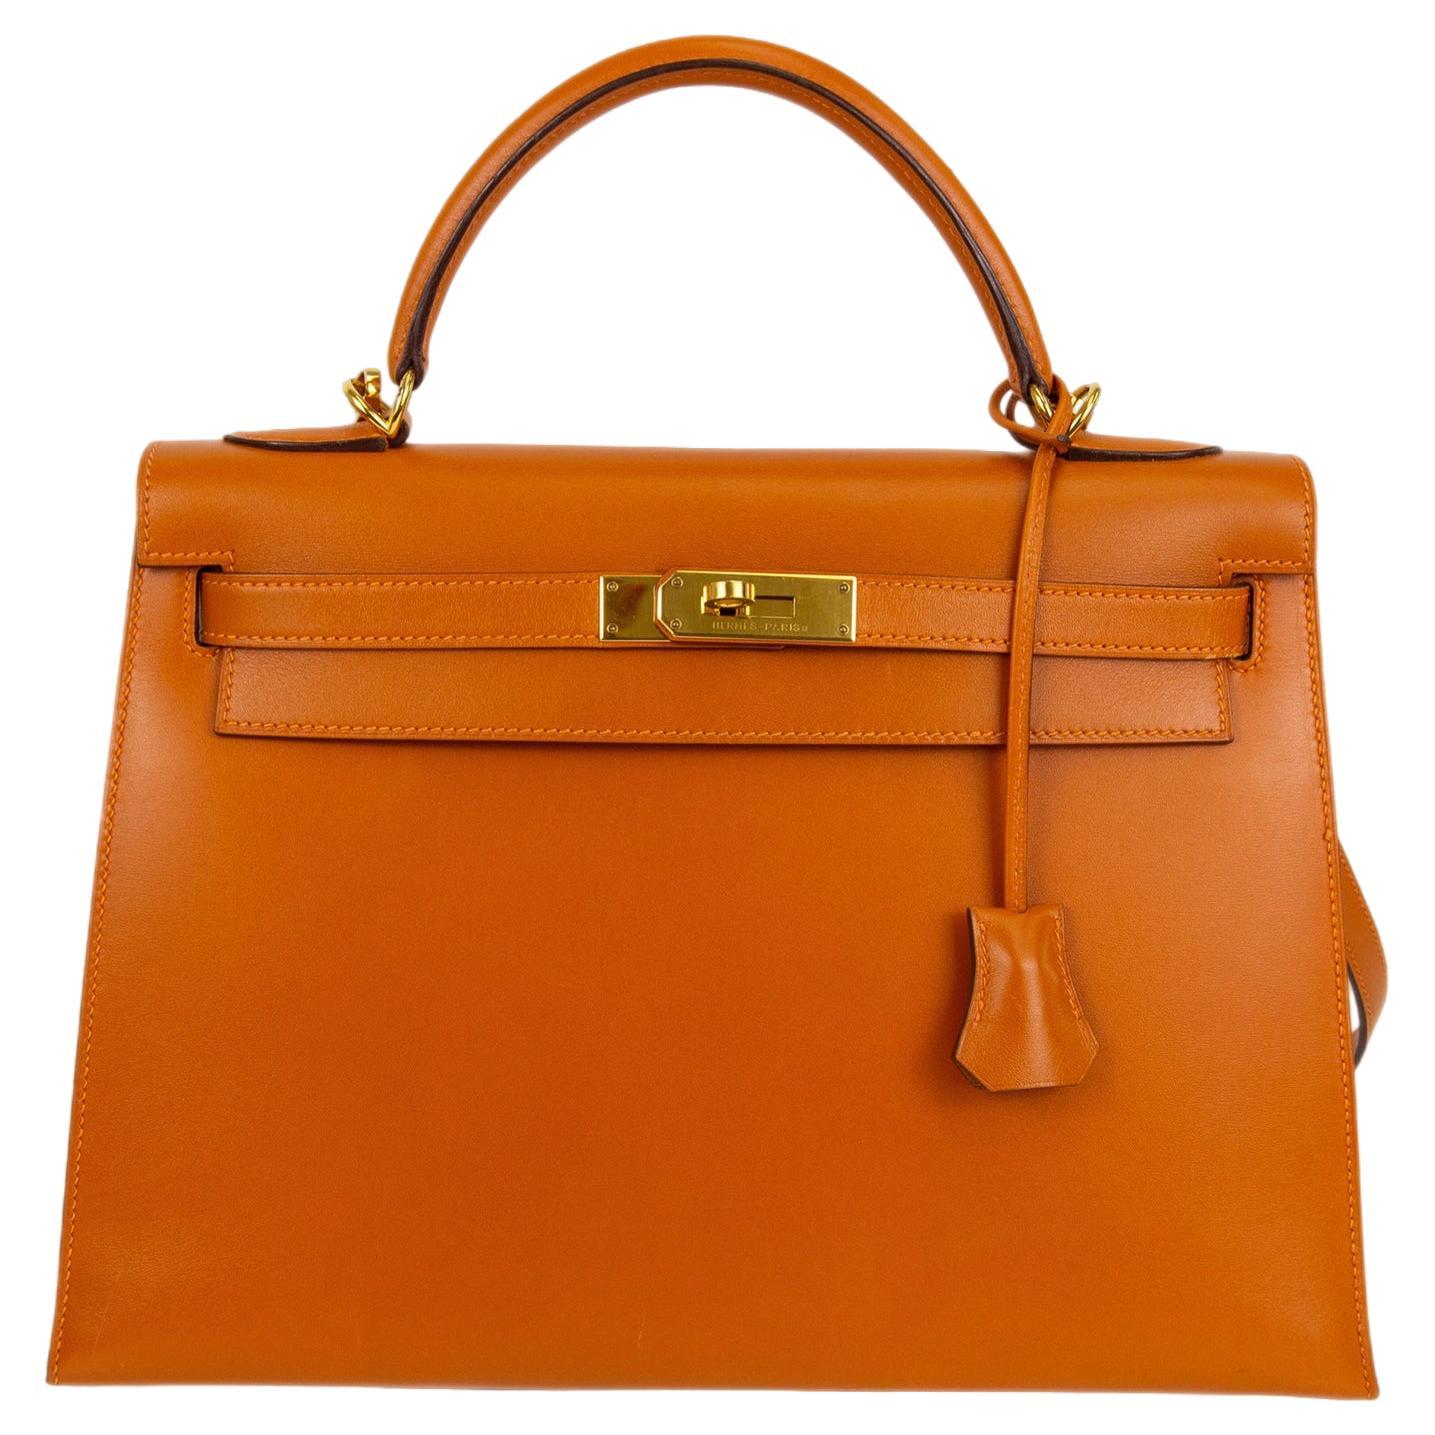 Hermes Kelly Sellier 32 Handbag Potiron with Gold Hardware For Sale